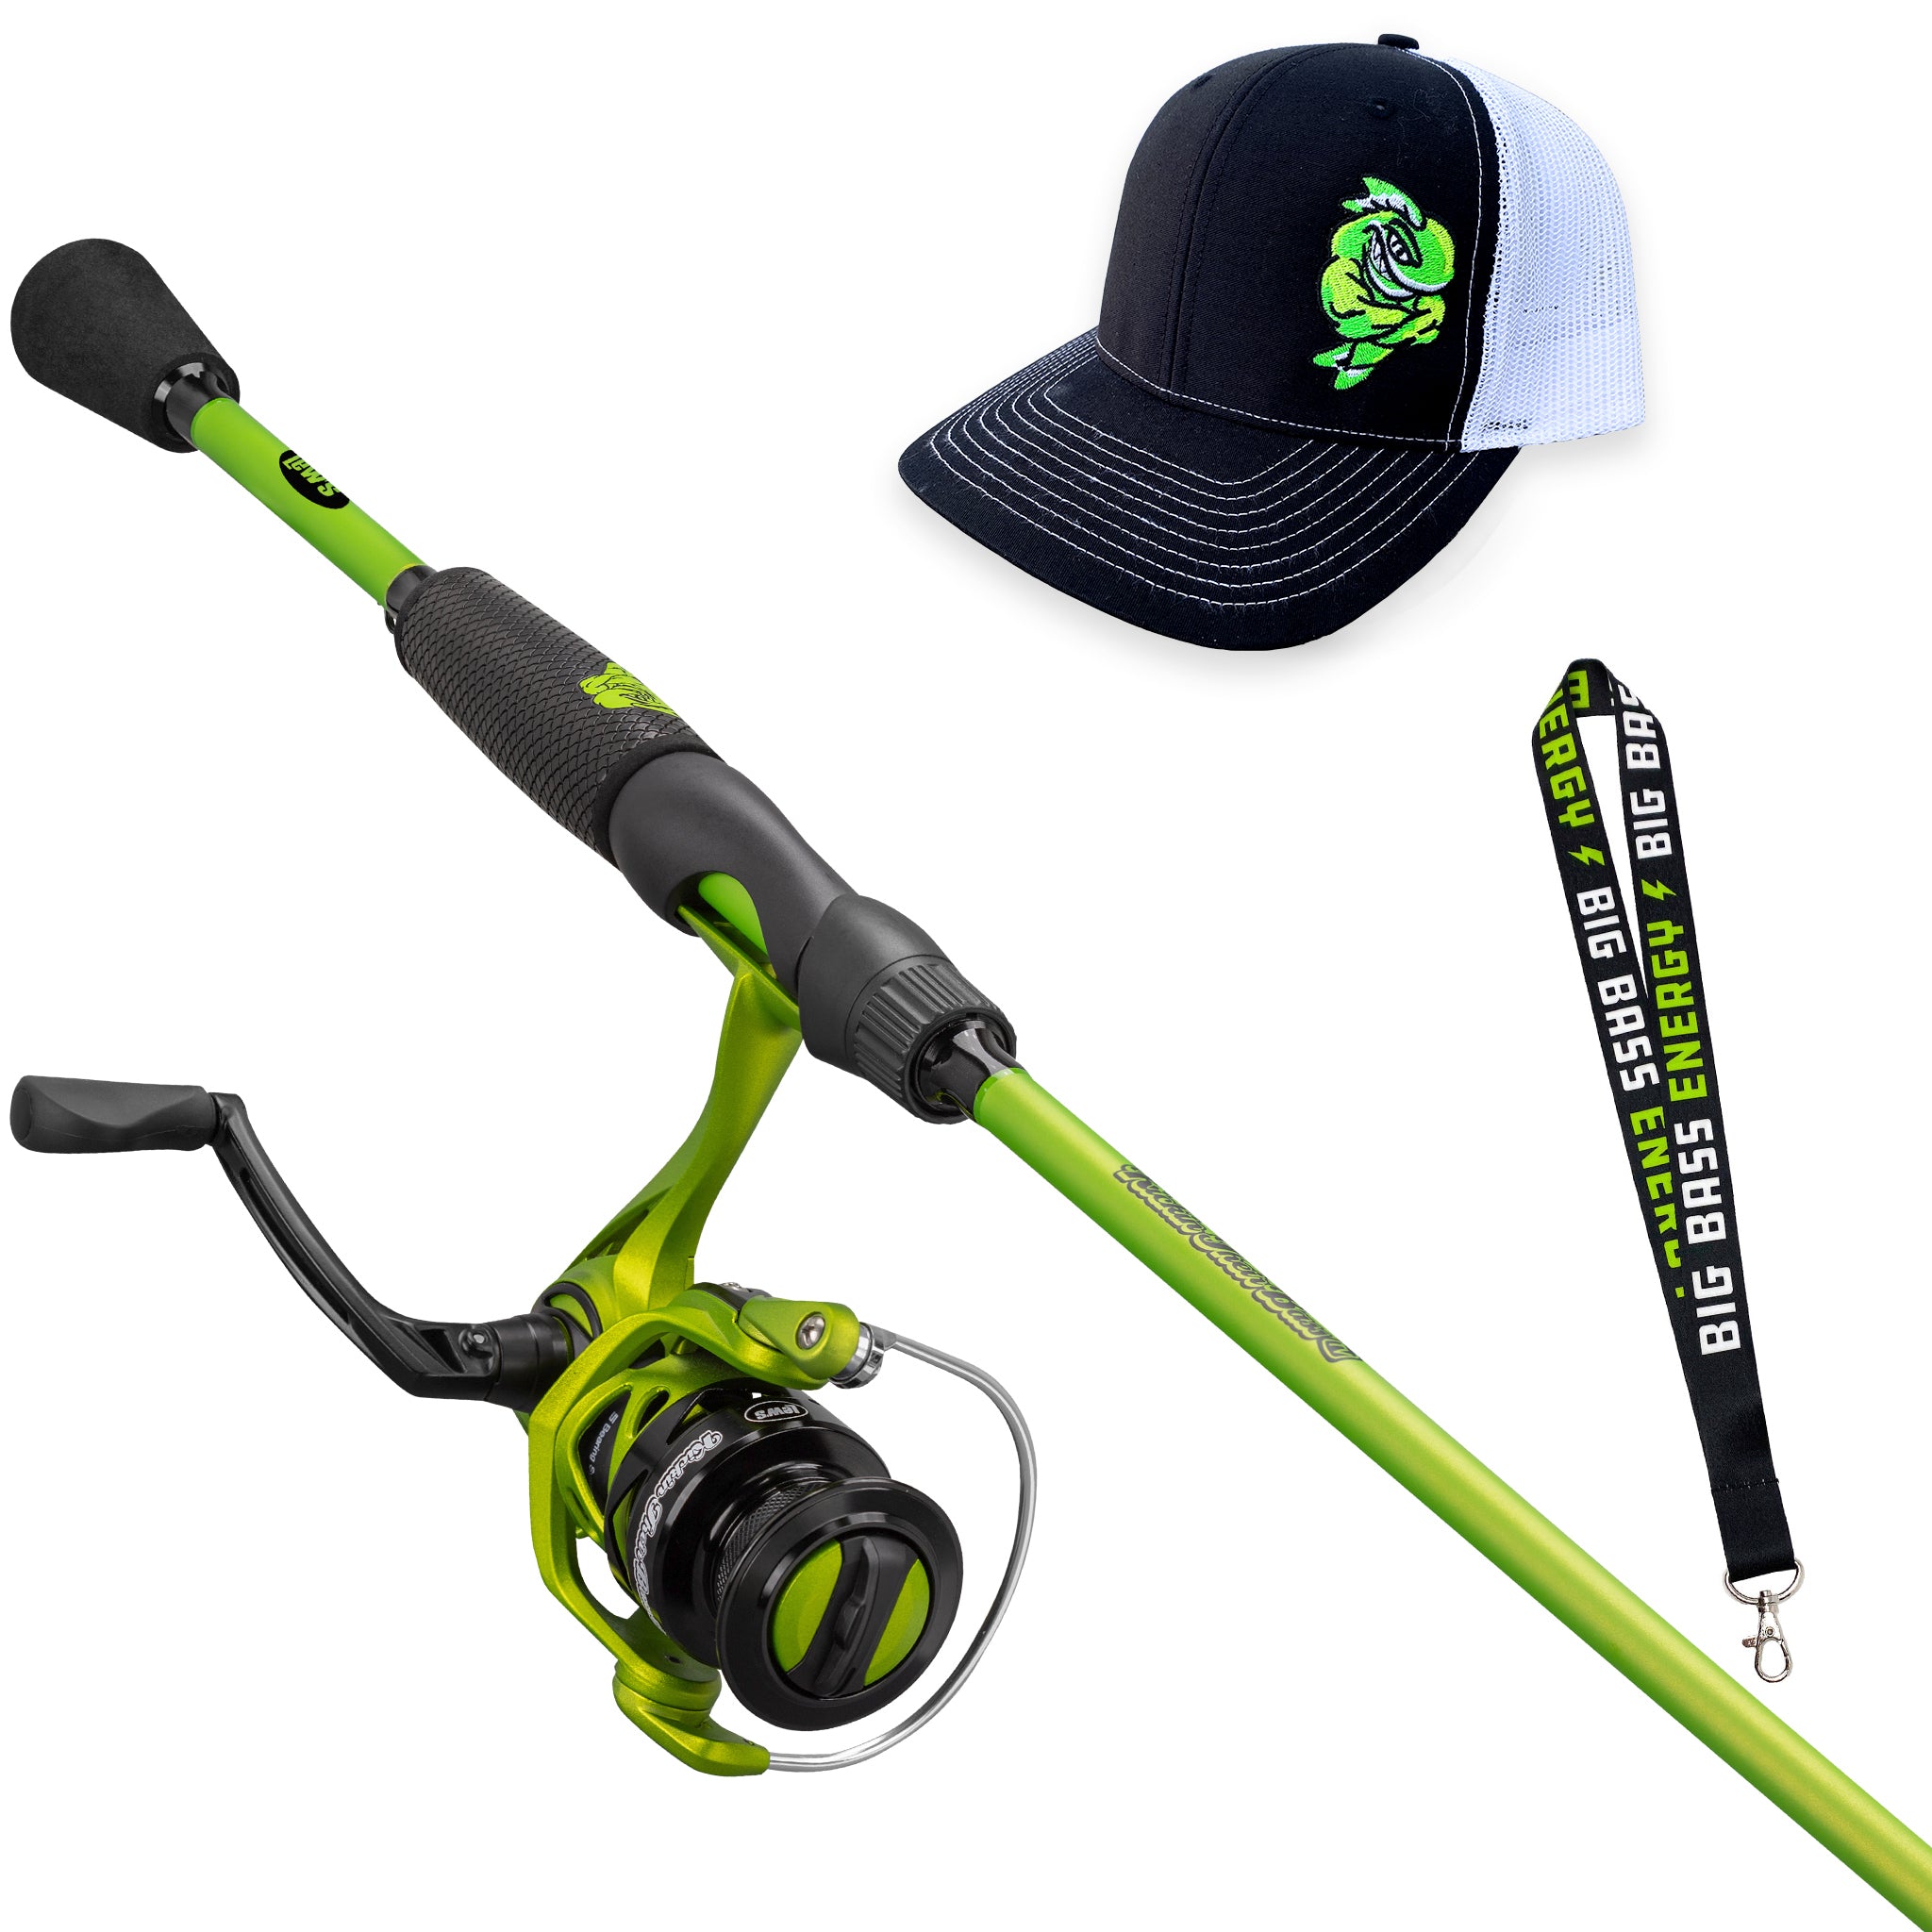 Kickin' Their Bass x Lew's Spinning Combo Package – Kickin Their